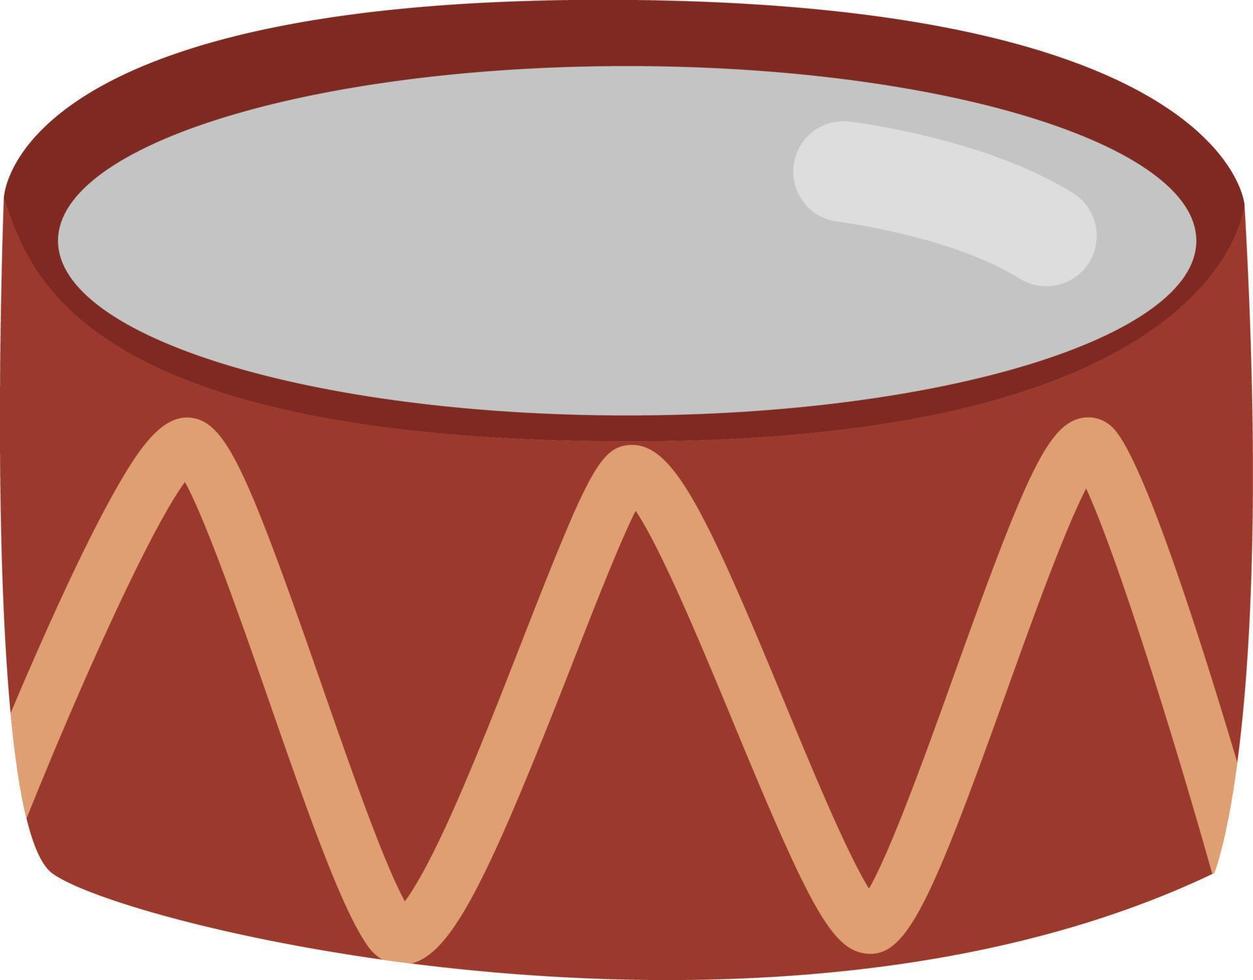 Wooden drum, illustration, vector, on a white background. vector